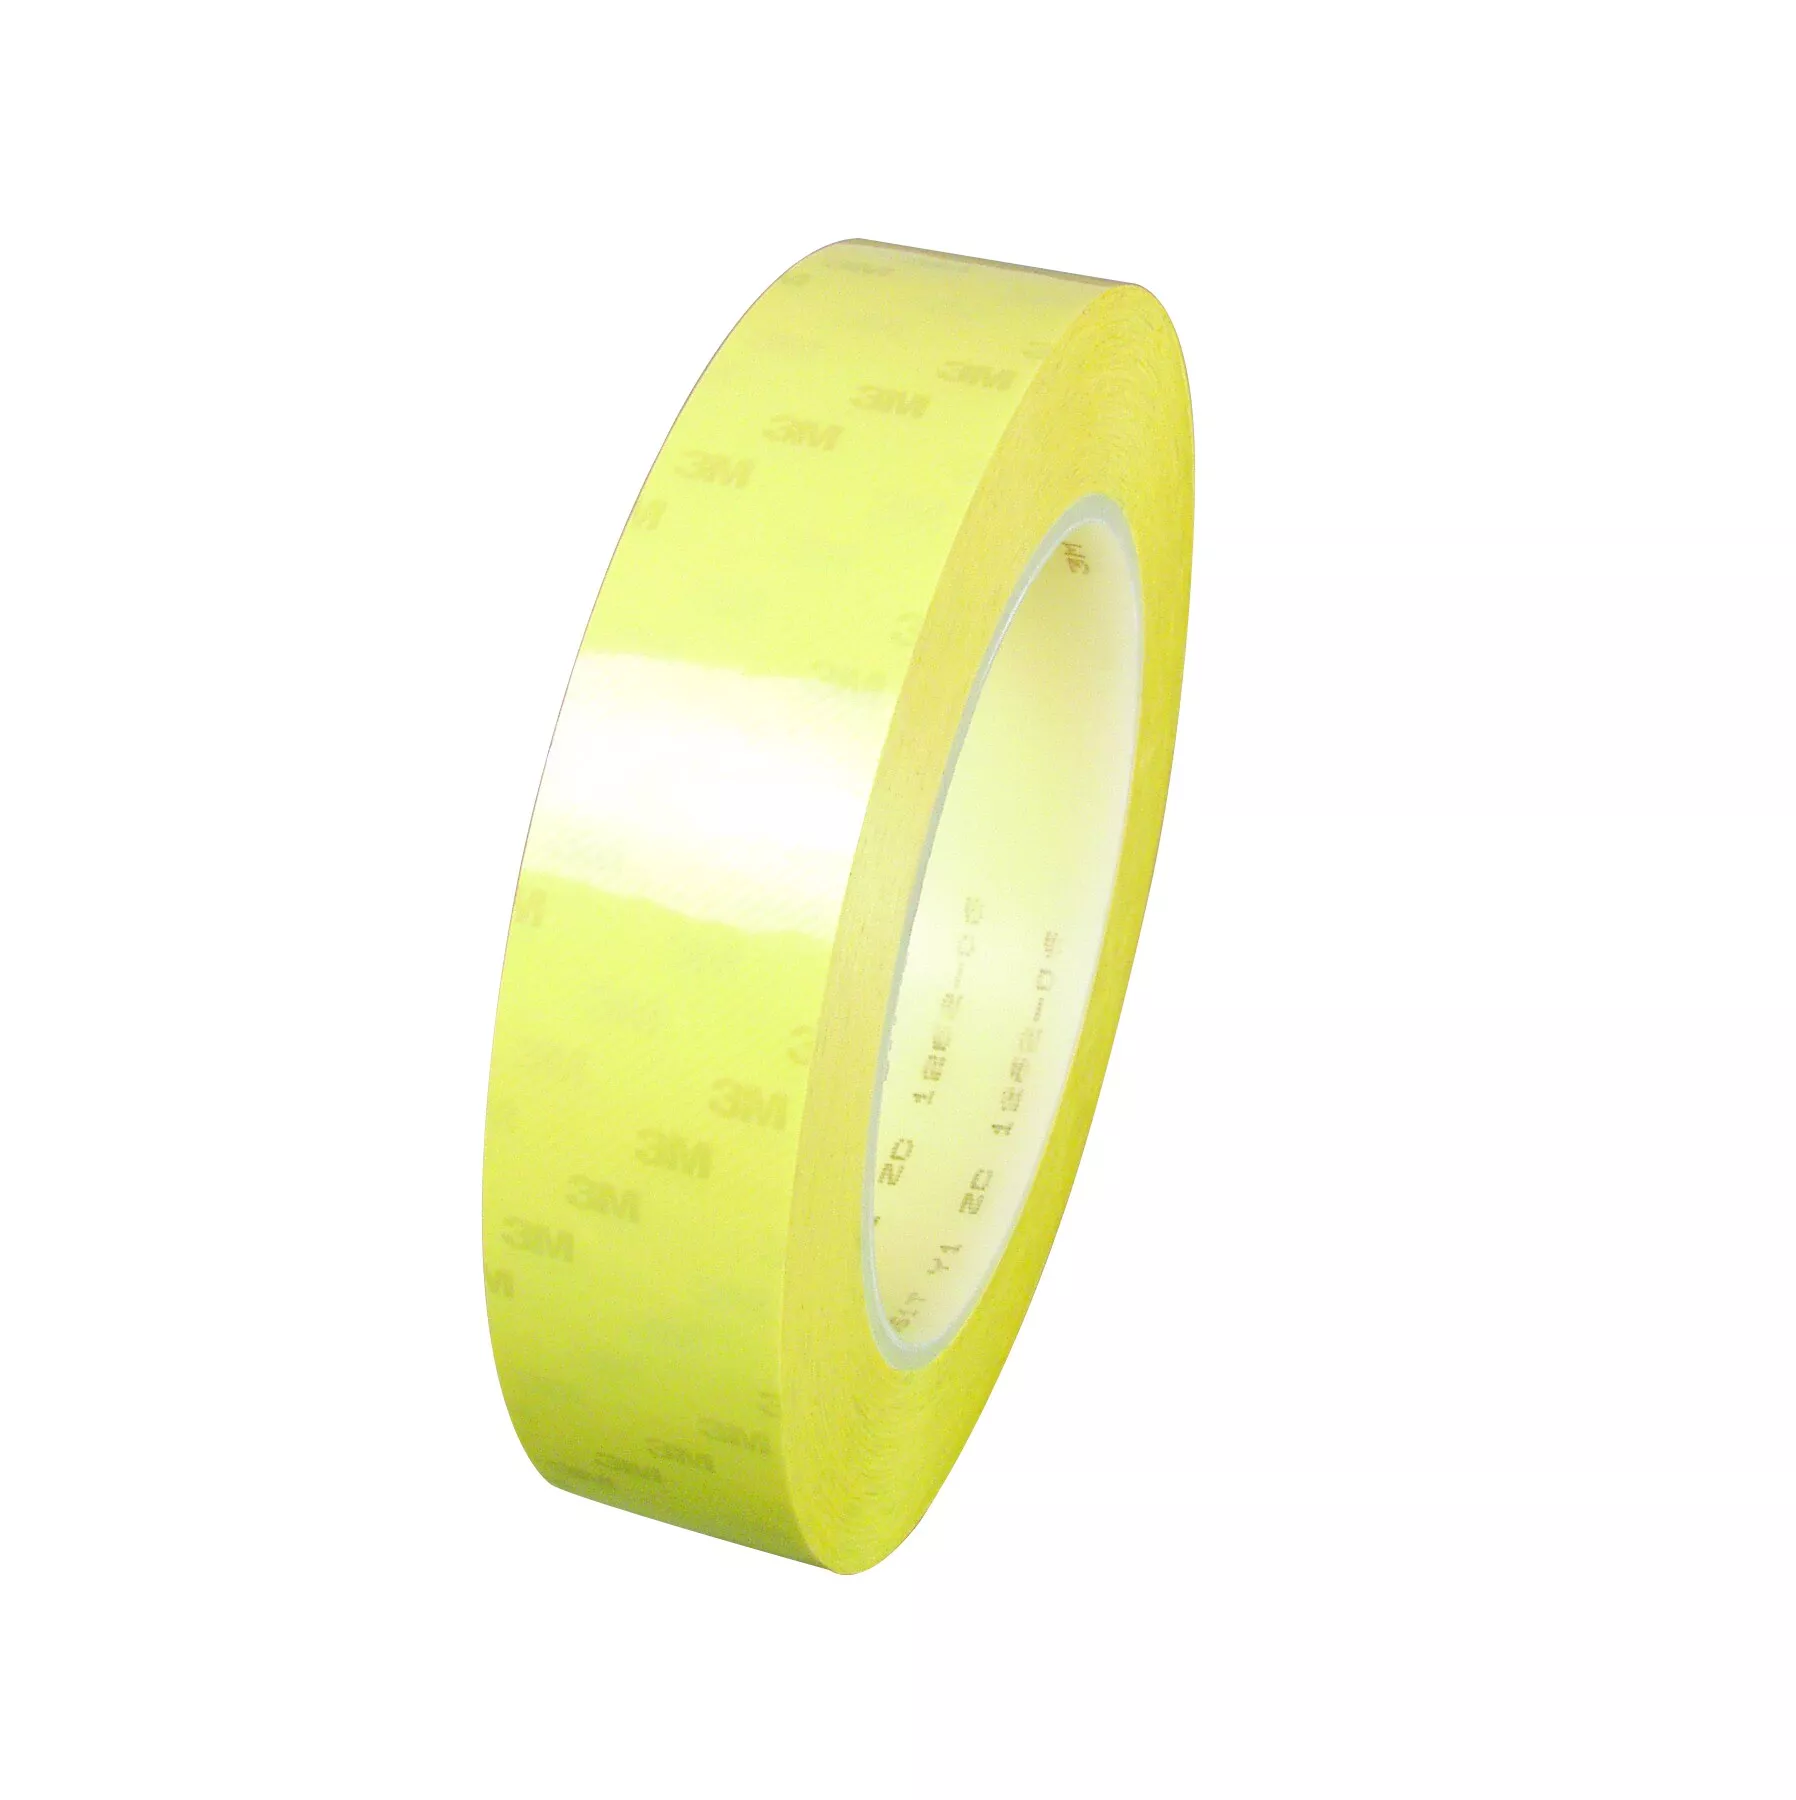 SKU 7000133150 | 3M™ Polyester Film Electrical Tape 56